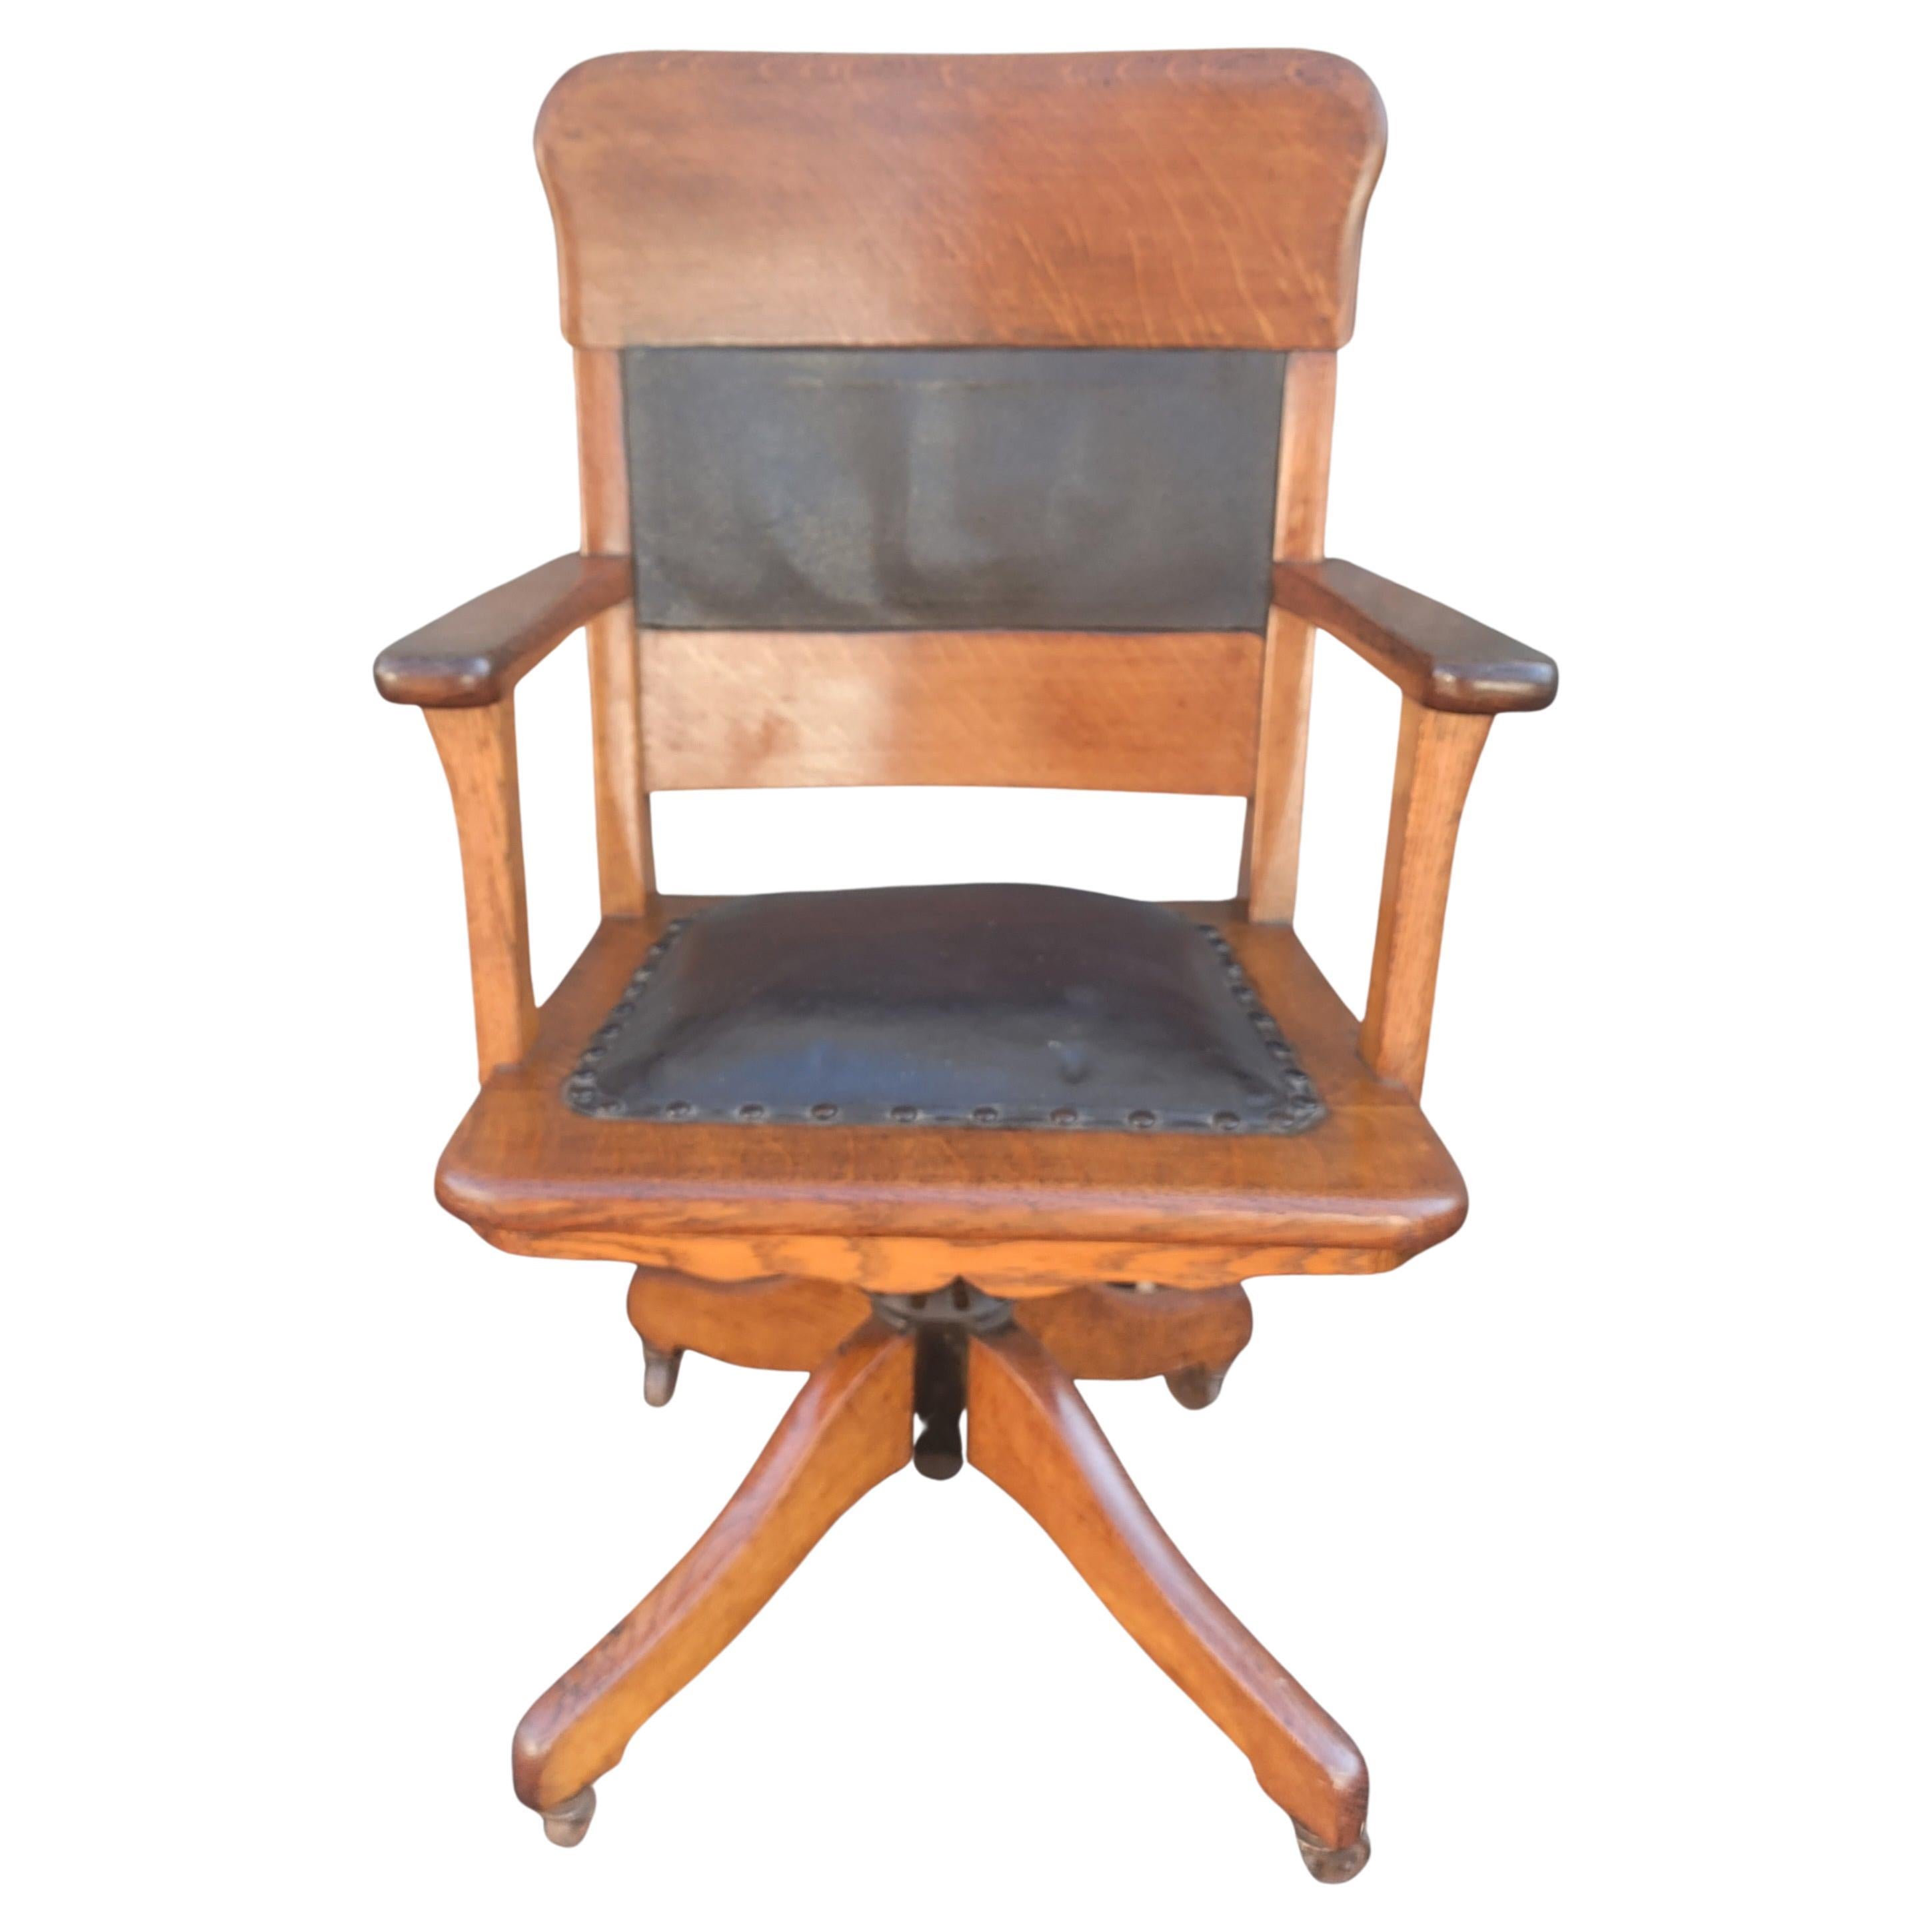 We are pleased to be offering this tiger sawn oak solid wood with leather seat and back lawyers/bankers swivel office chair that dates from the early 1900s in original condition. The chair is finished in a dark oak stain. It has shapely style arms,